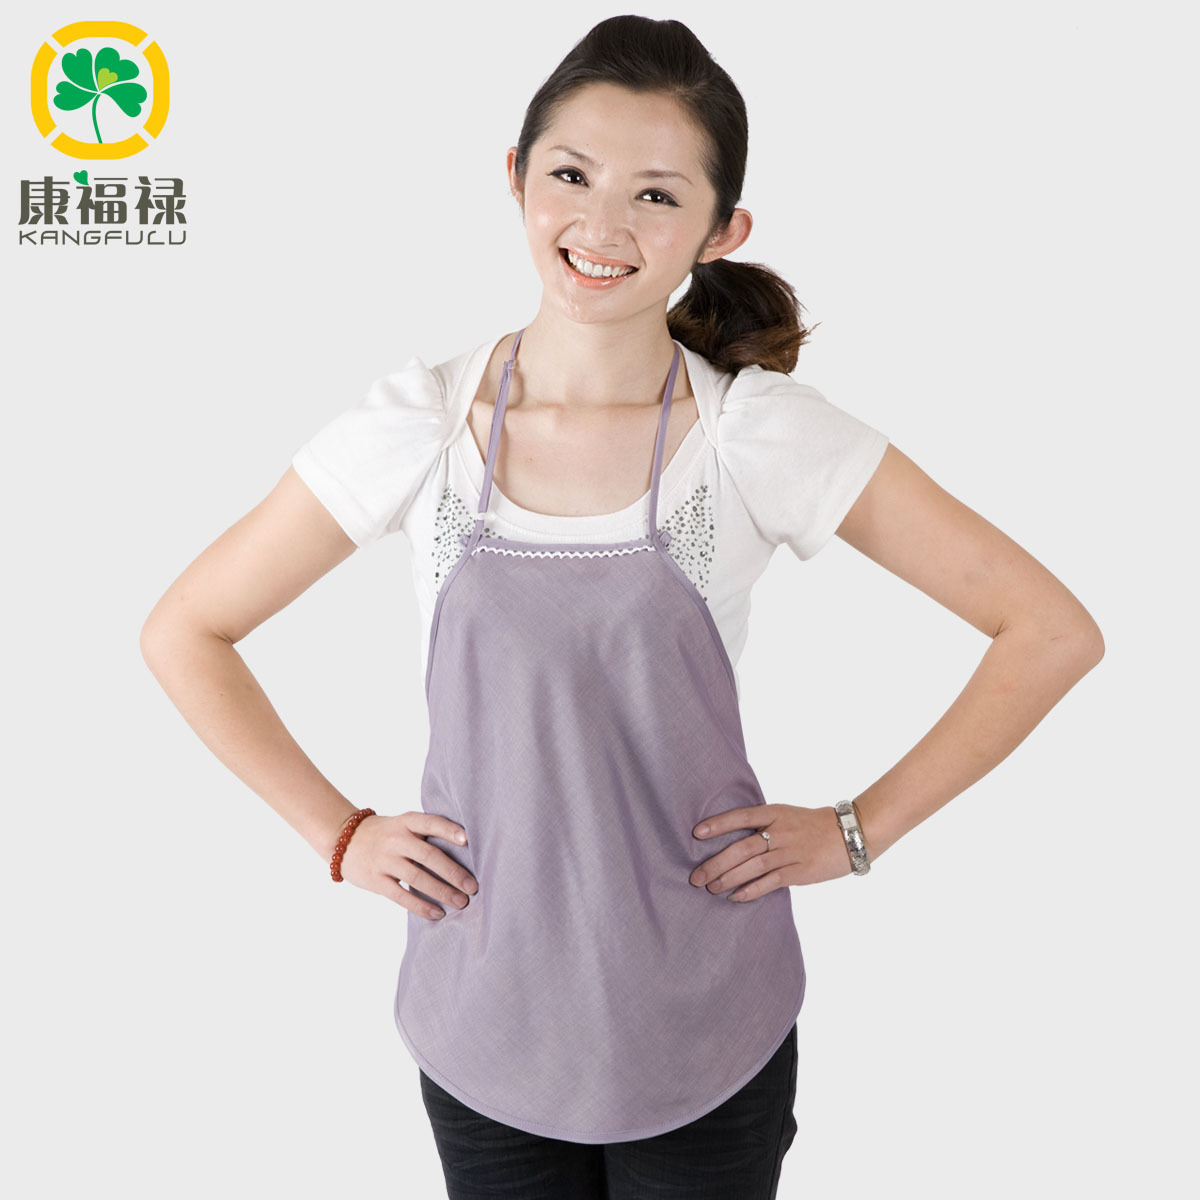 Multicolour silver fiber radiation-resistant bellyached radiation-resistant maternity clothing